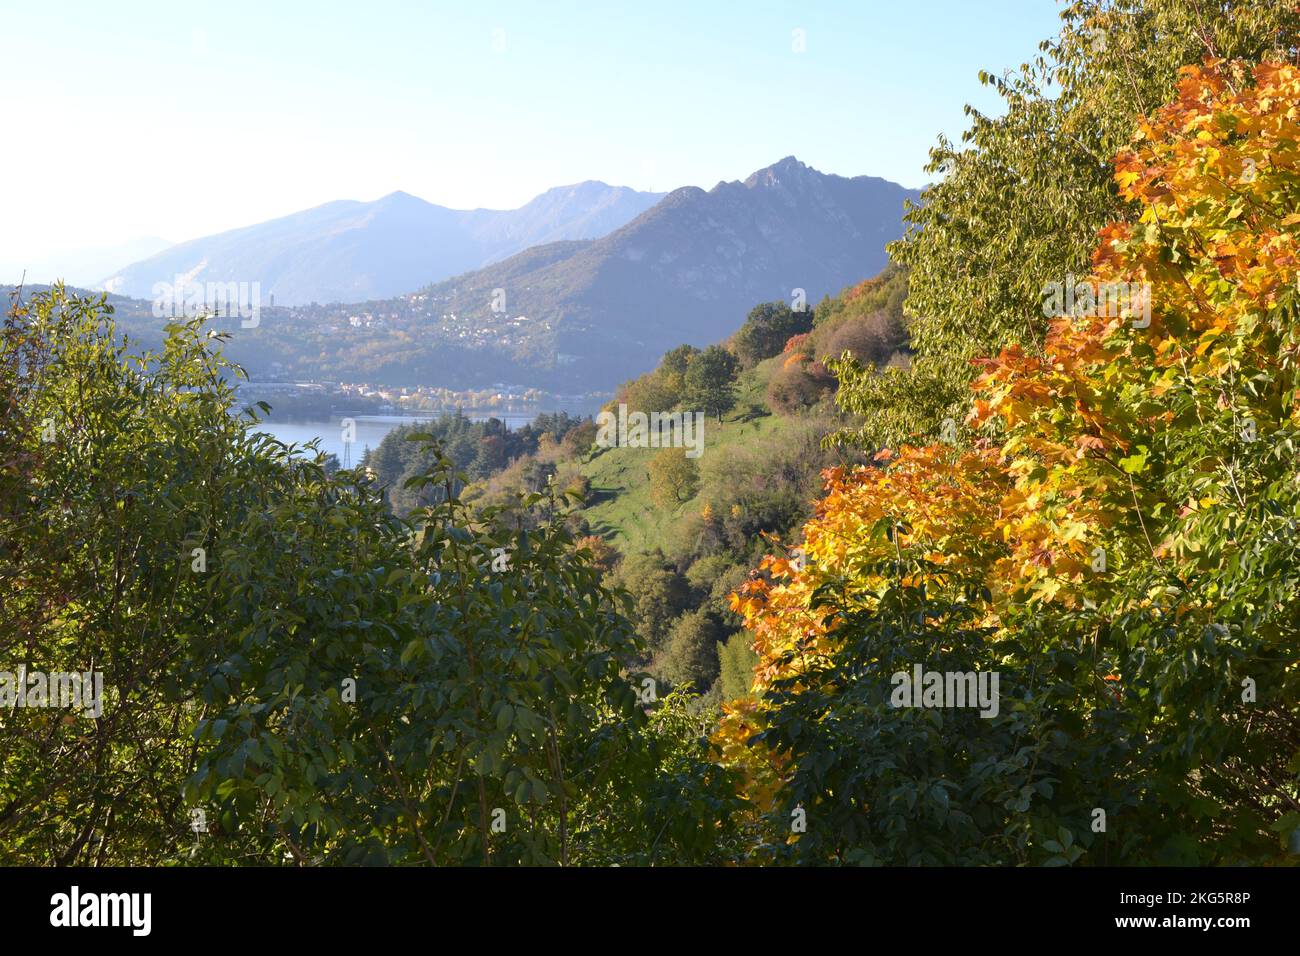 Beautiful autumn landscape in mountains with autumnal trees in the foreground.Blur of the mountains and lake in the background. Multilevel panorama. Stock Photo